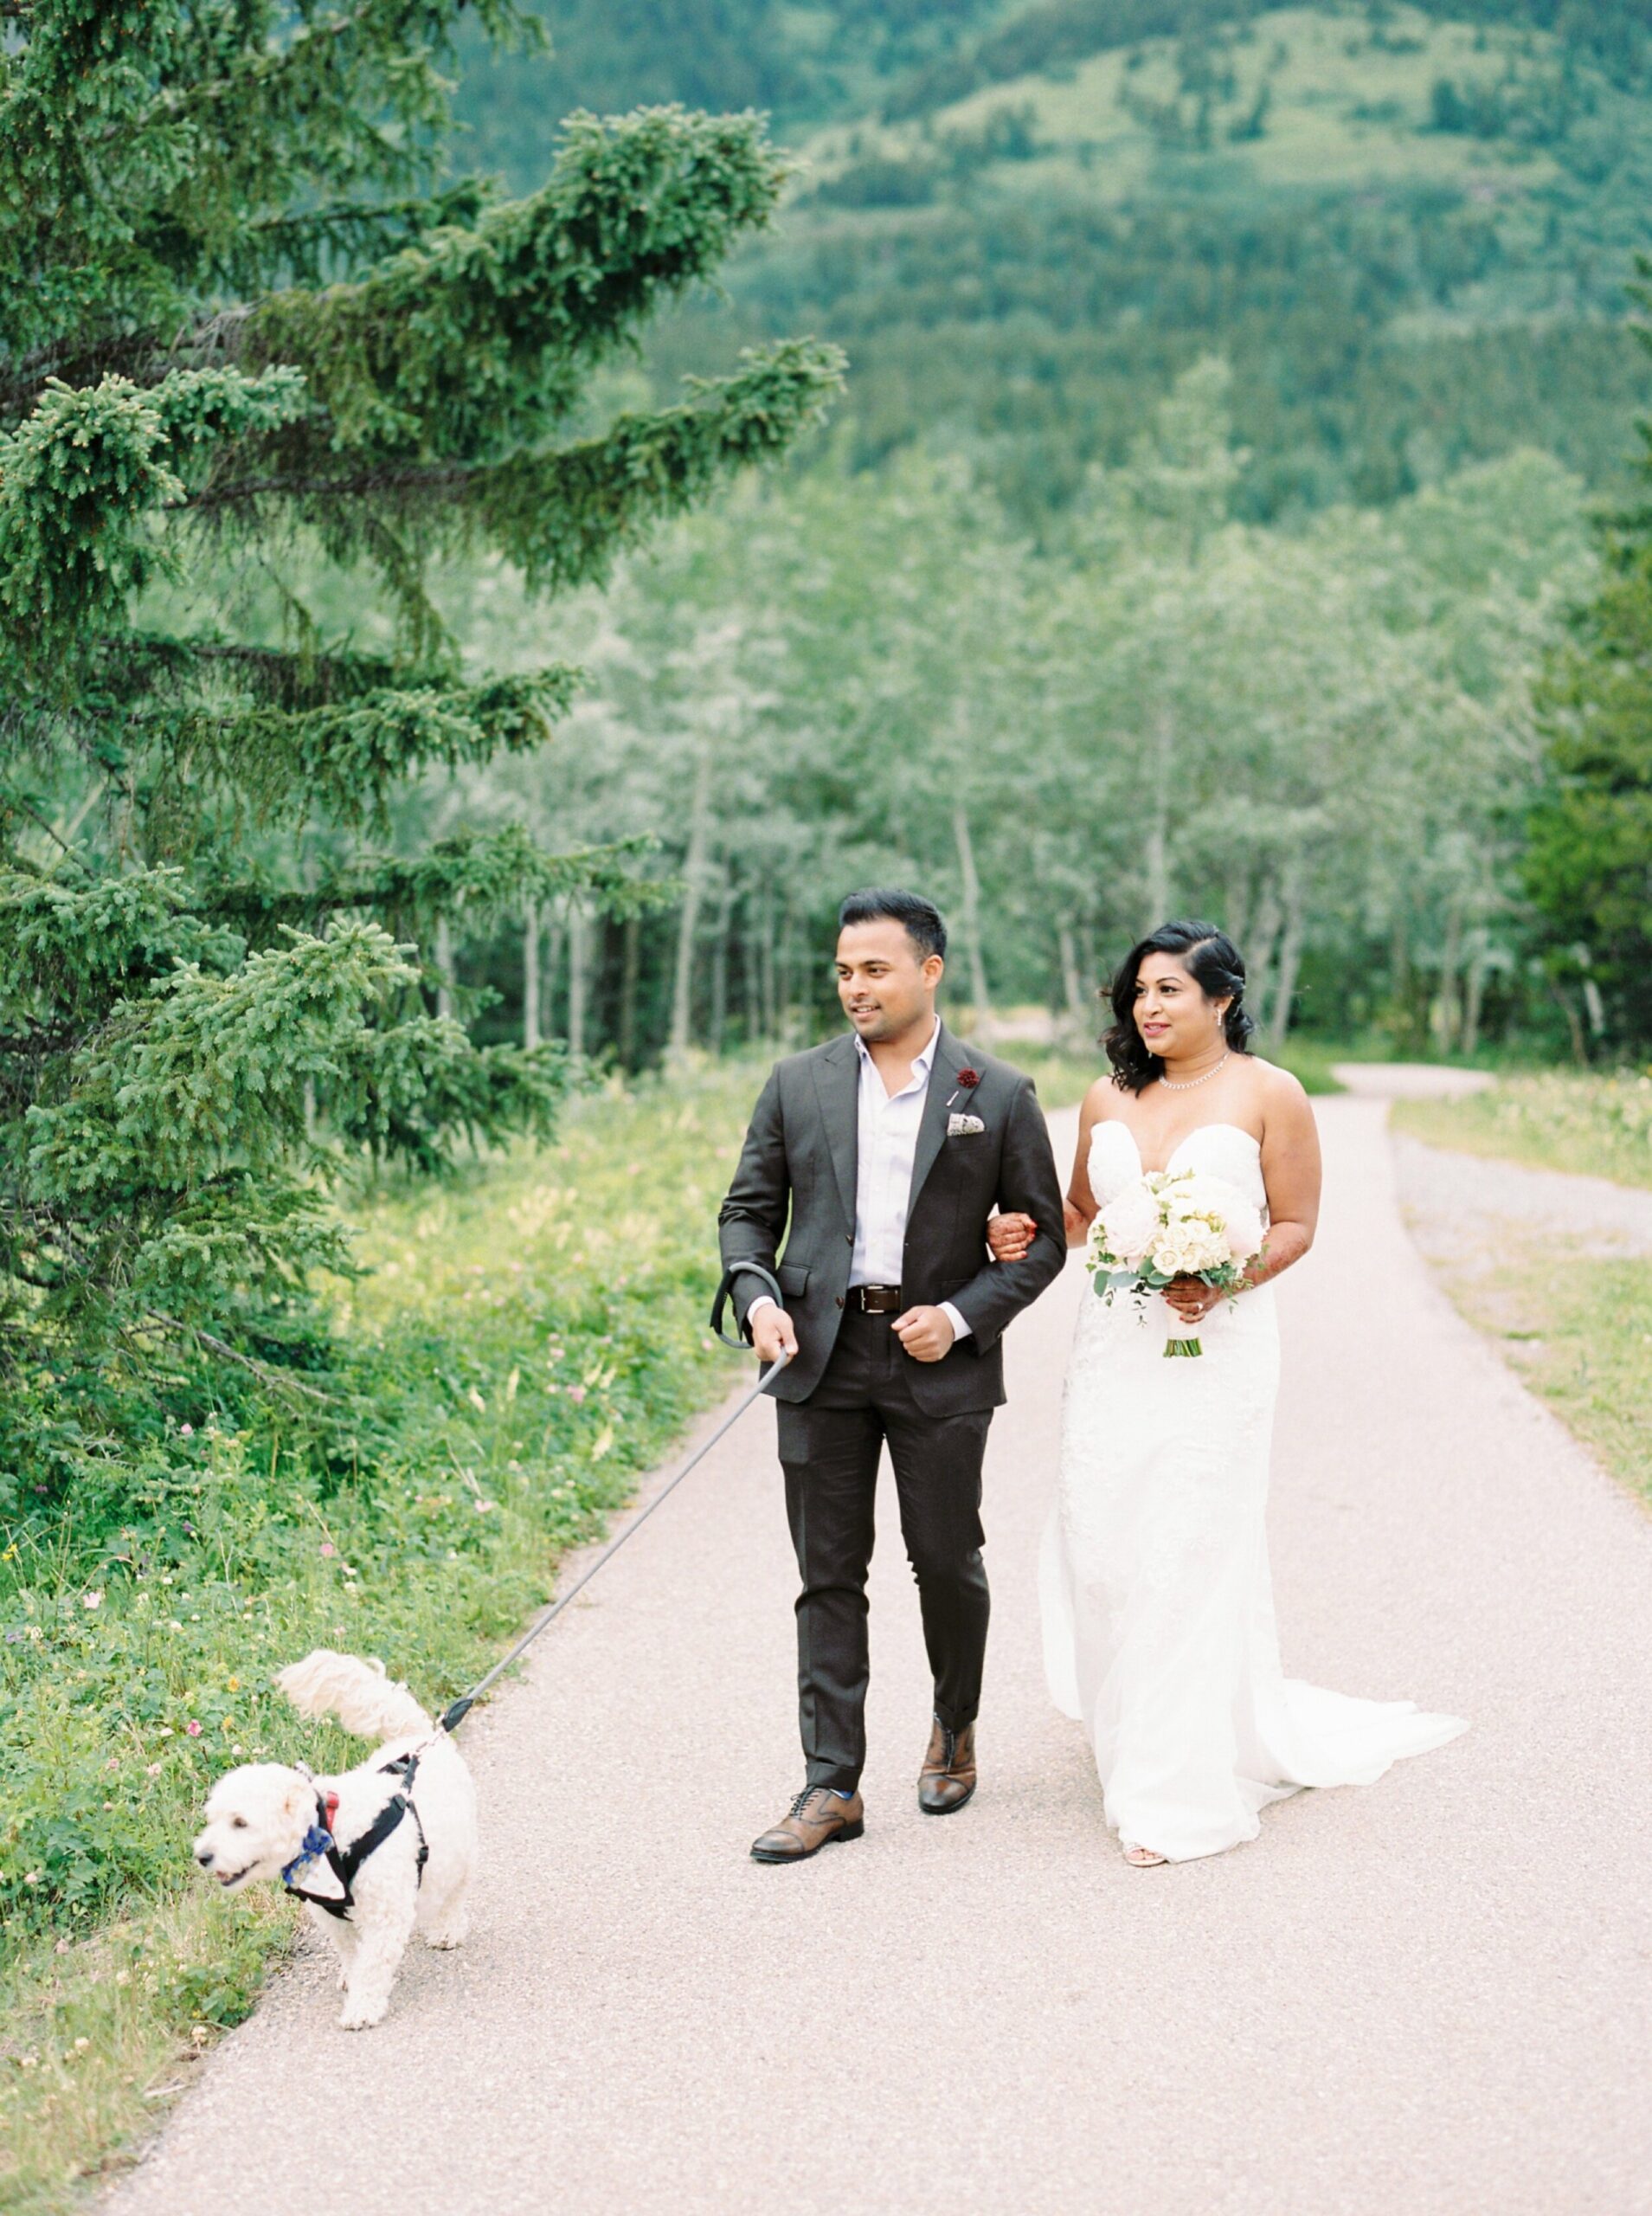  mini ceremony brides and groom navy suit and minimal form fitting dress | Kananaskis micro wedding elopement in the mountains 